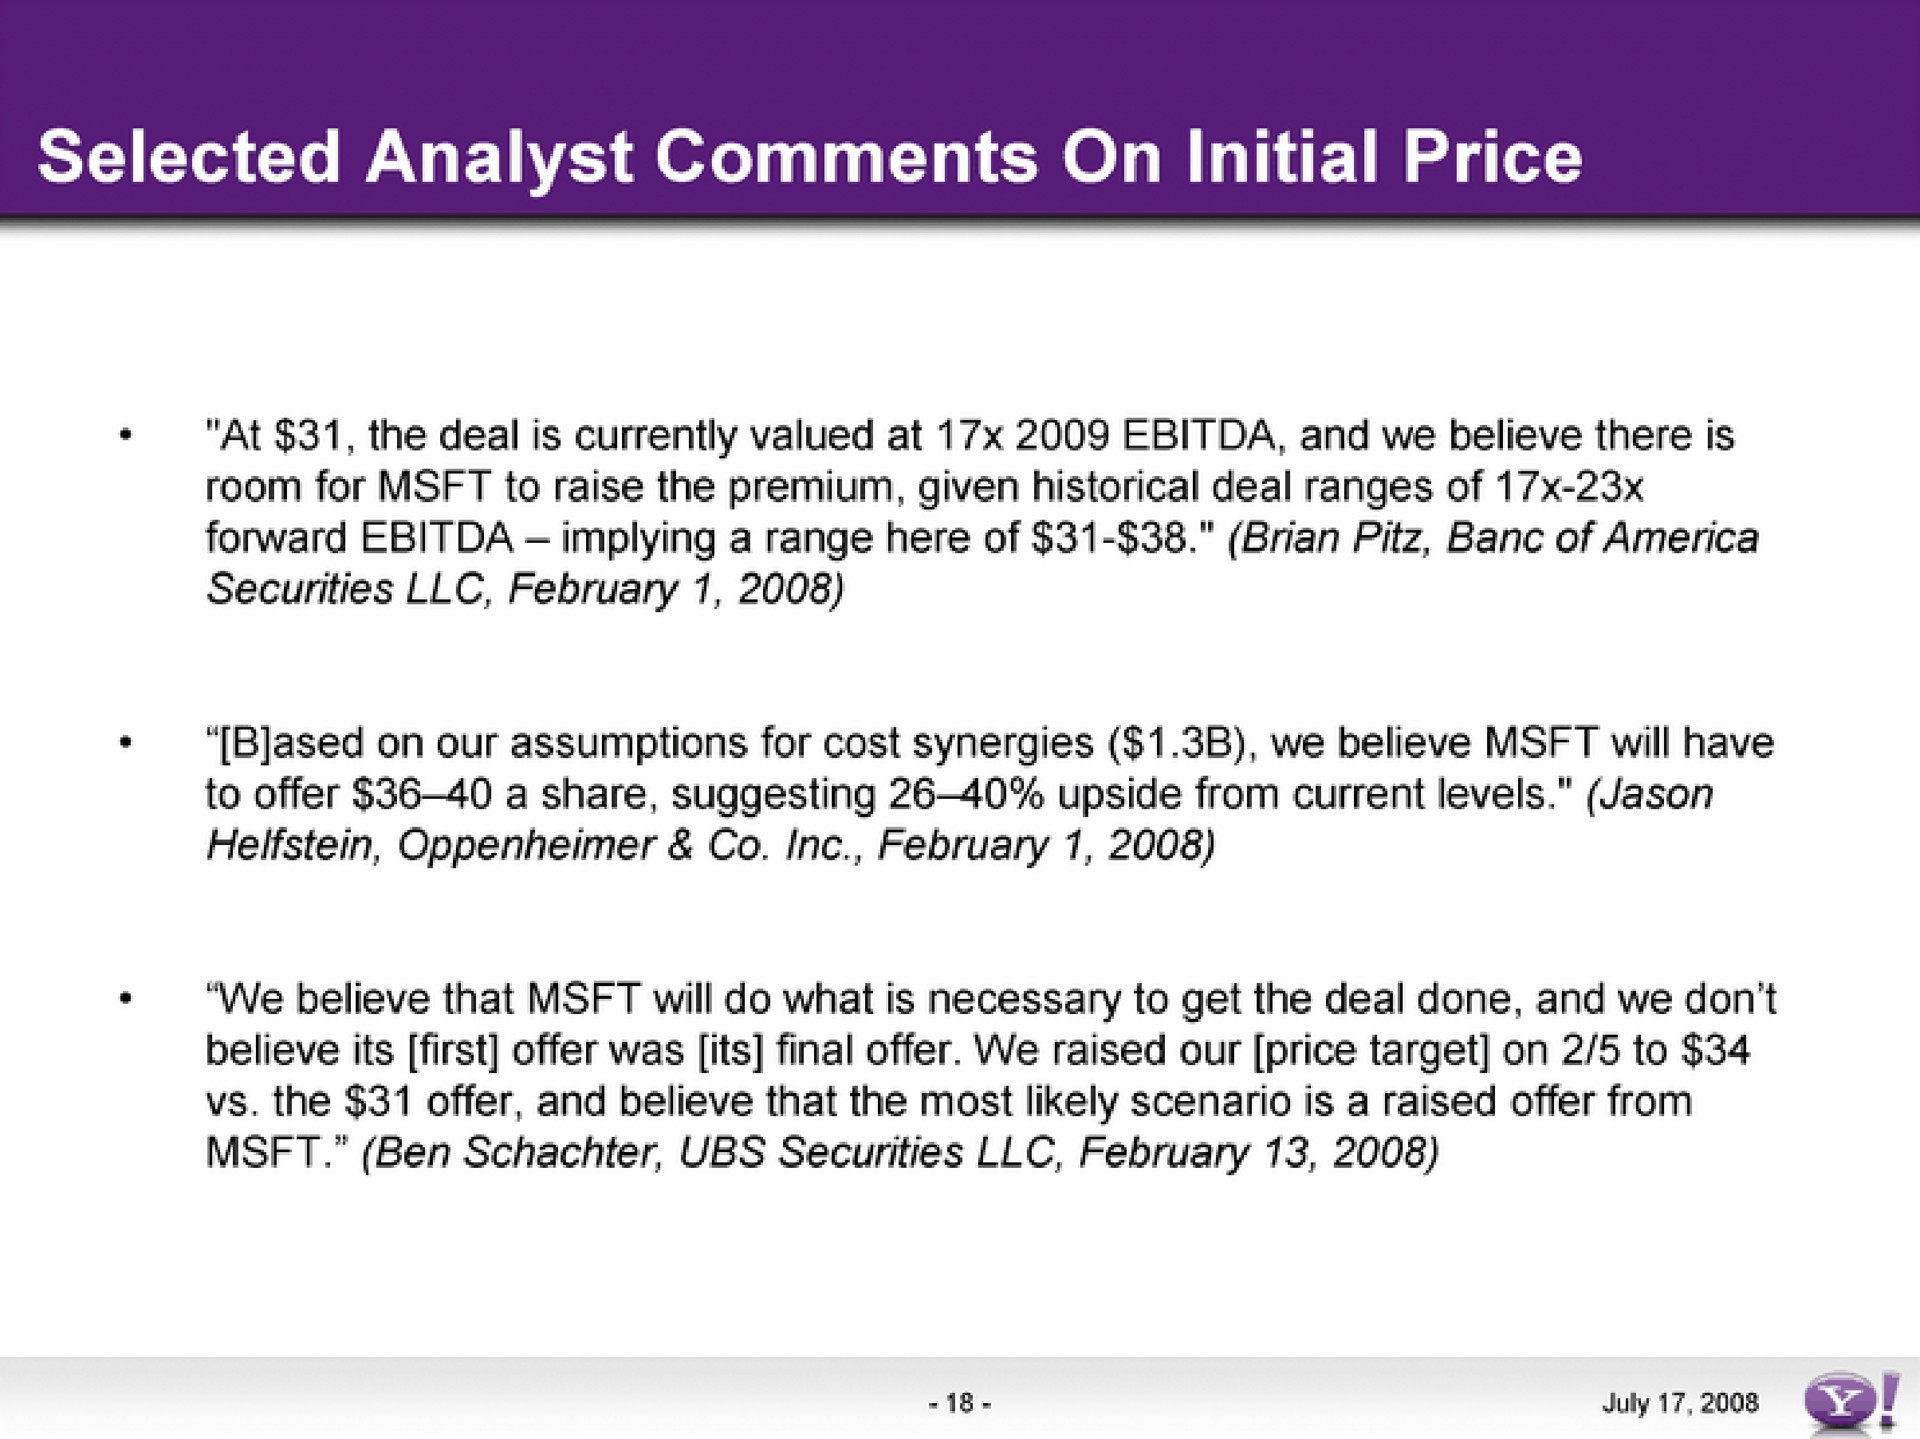 selected analyst comments on initial price | Yahoo